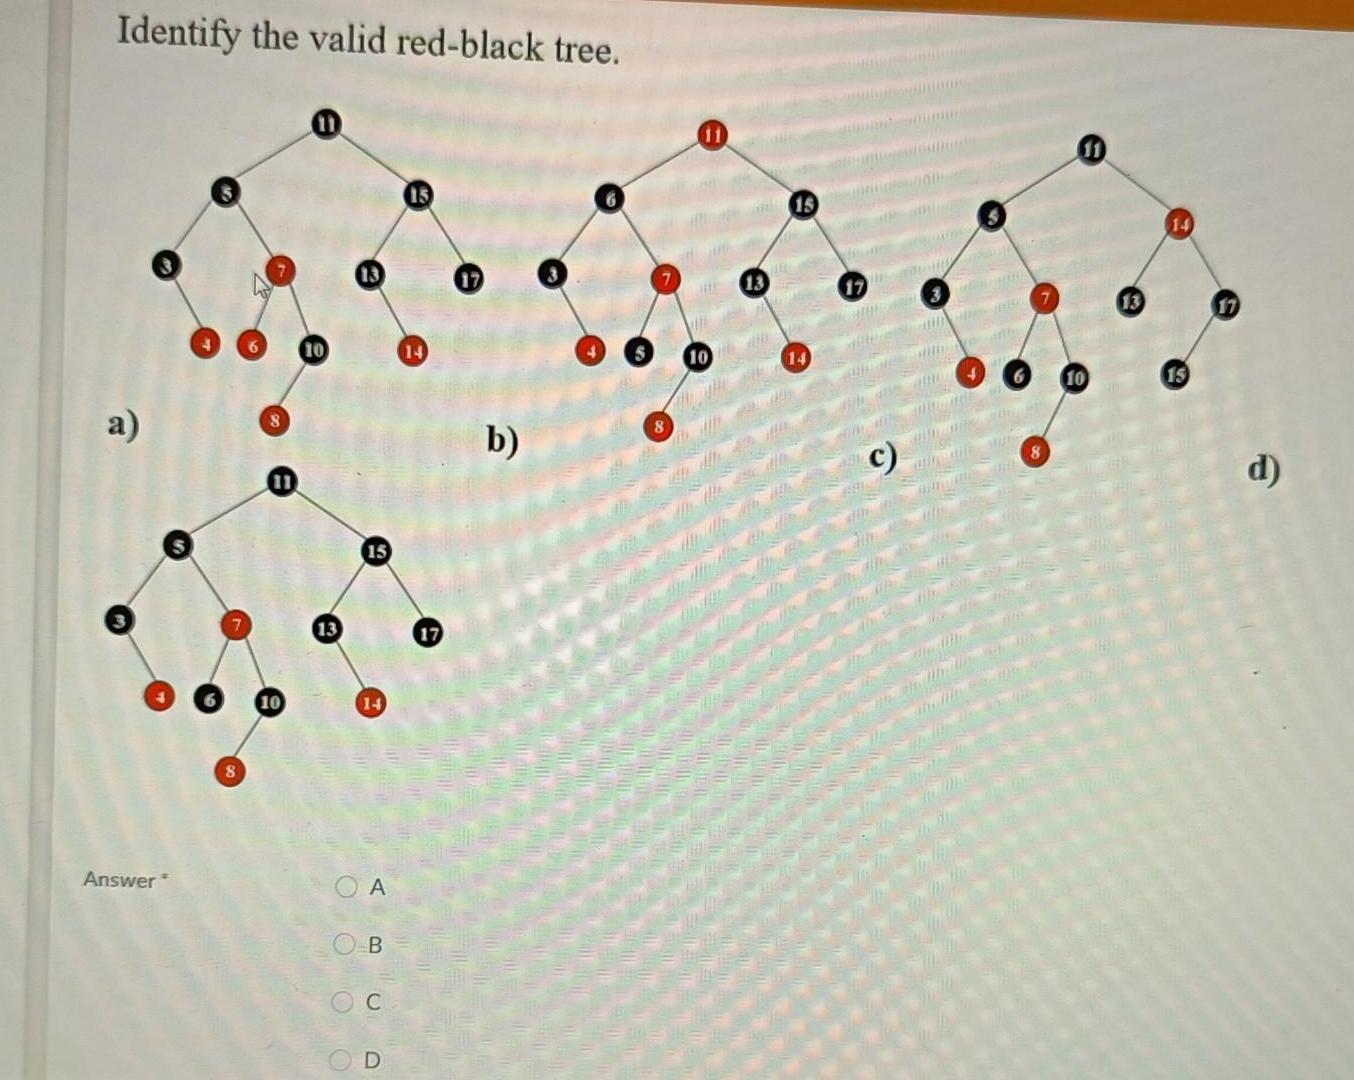 Identify the valid red-black tree. a) Answer* 8 6 8 1 10 13 OO 13 15 14 A D 14 17 17 b) 8 13 15 14 17 RUNDFUN